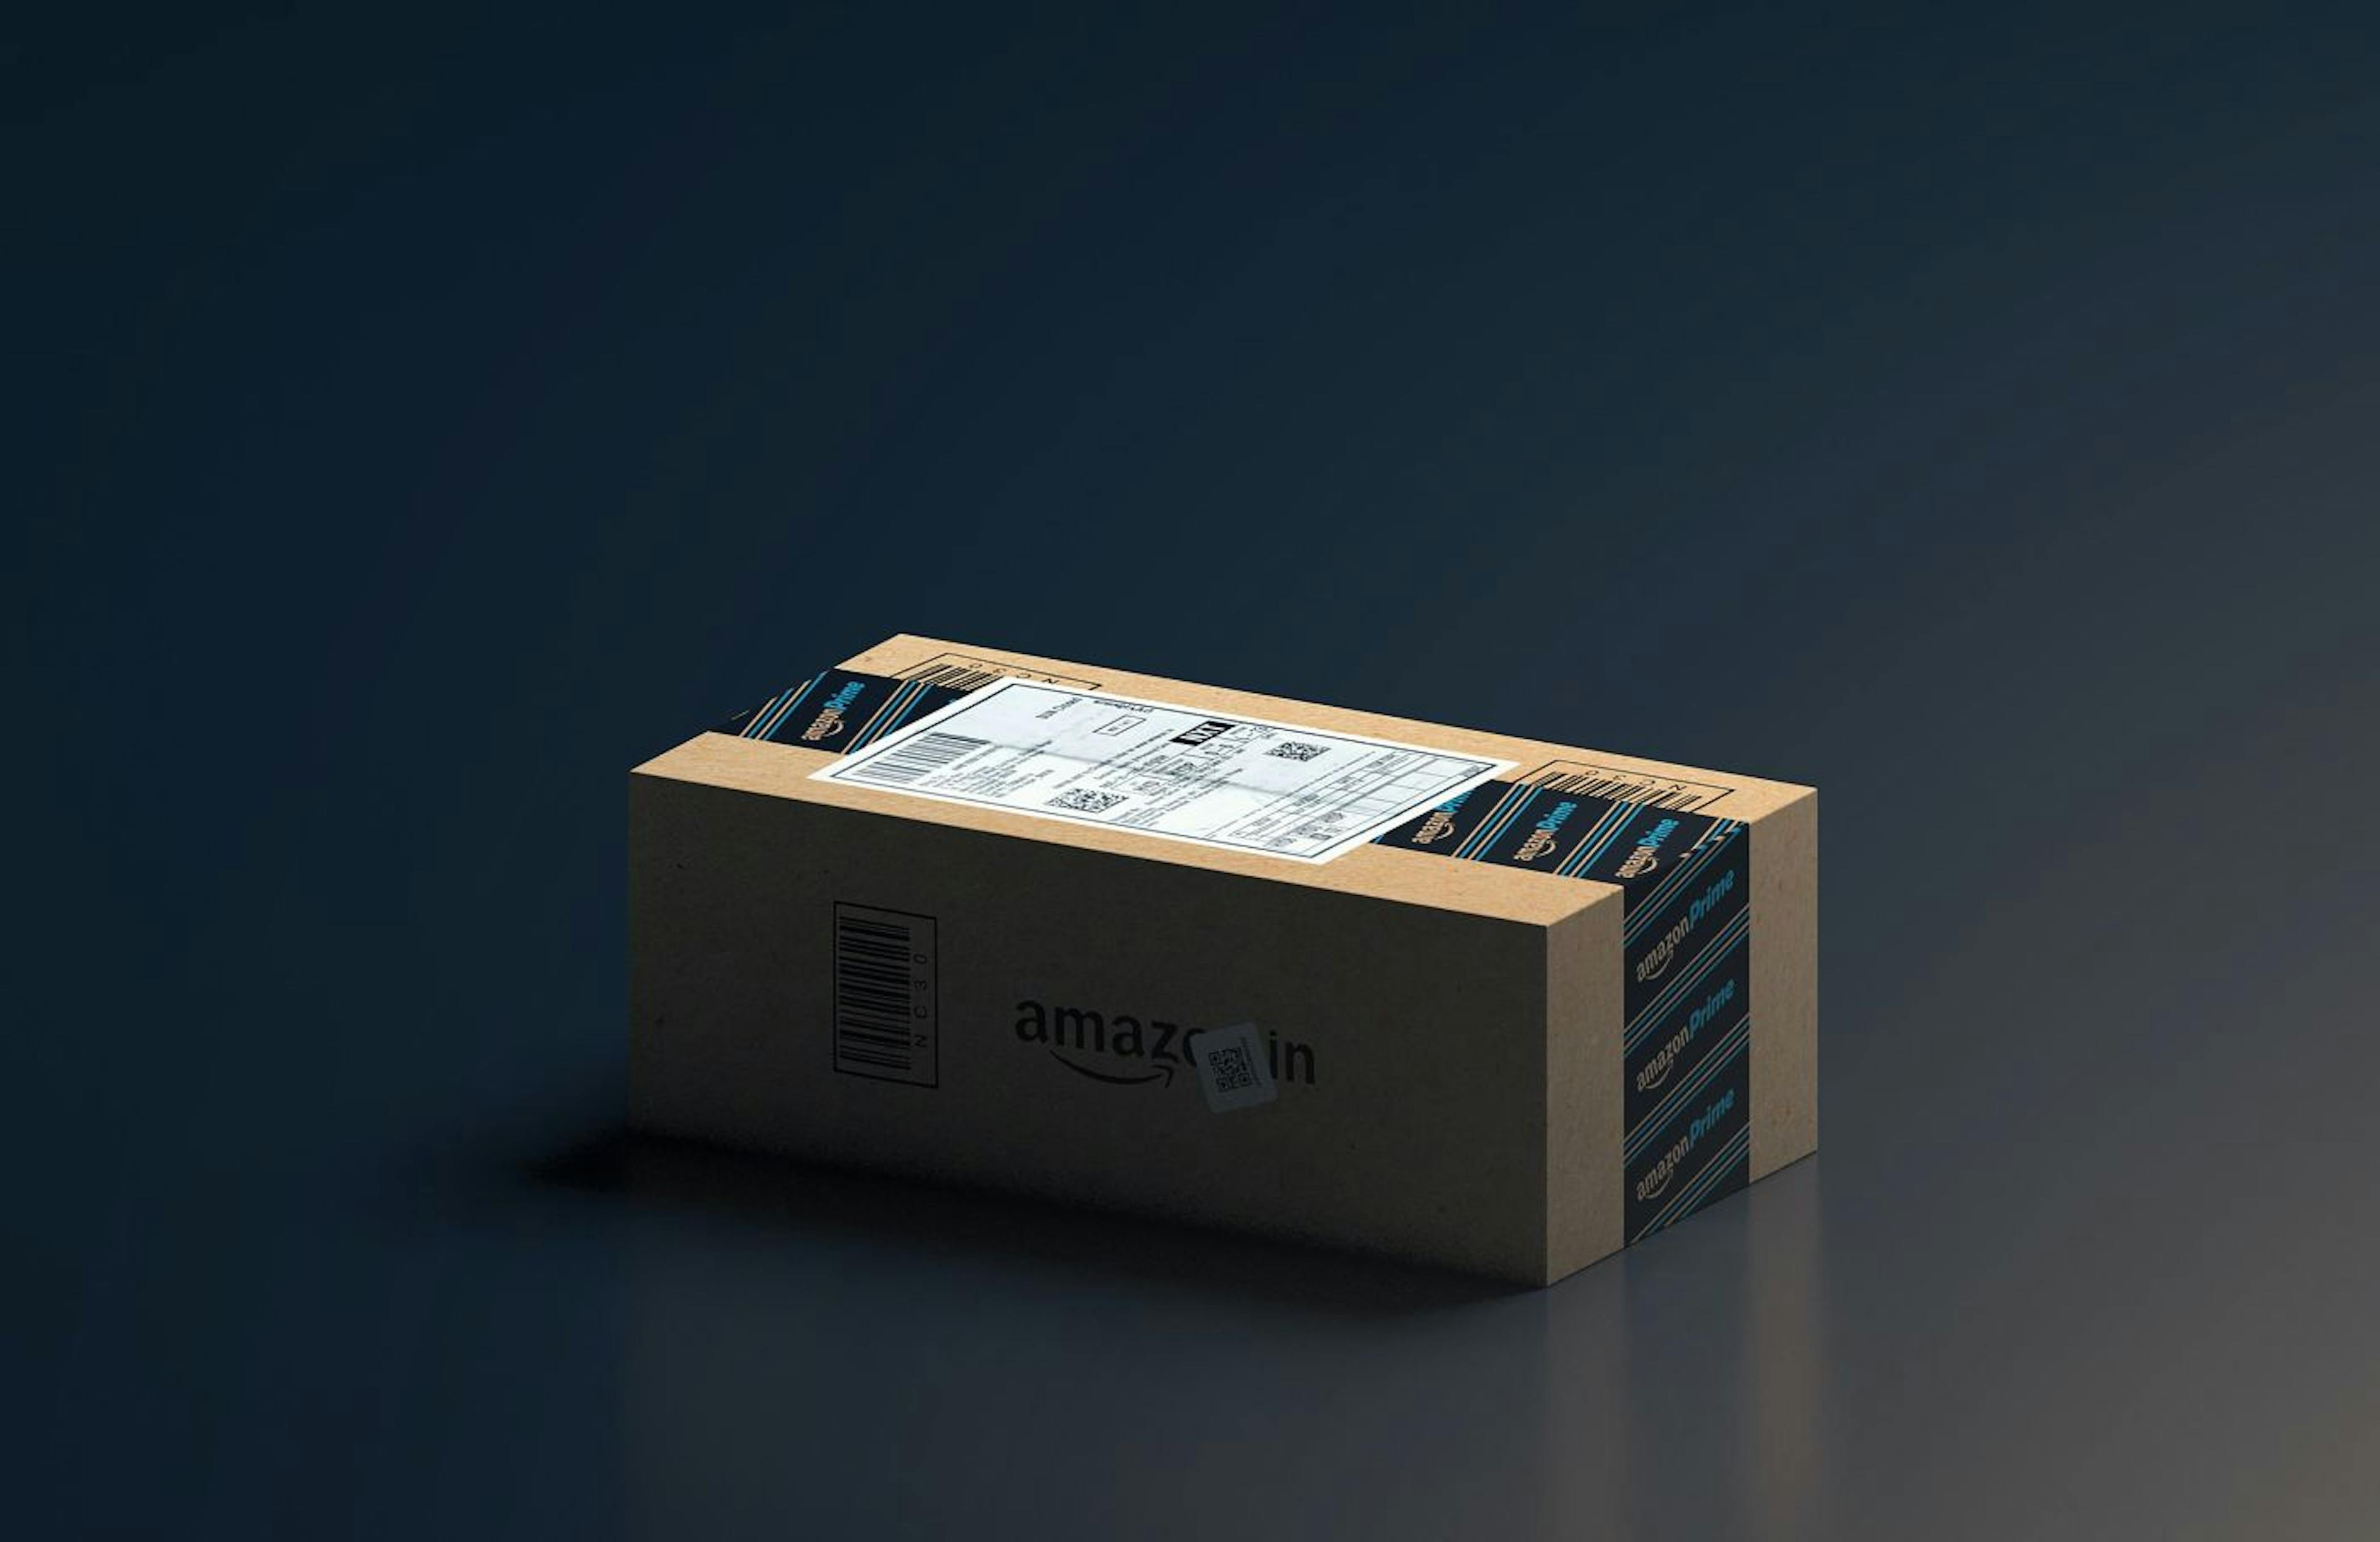 /how-amazon-treats-warehouse-workers-who-contracted-covid feature image